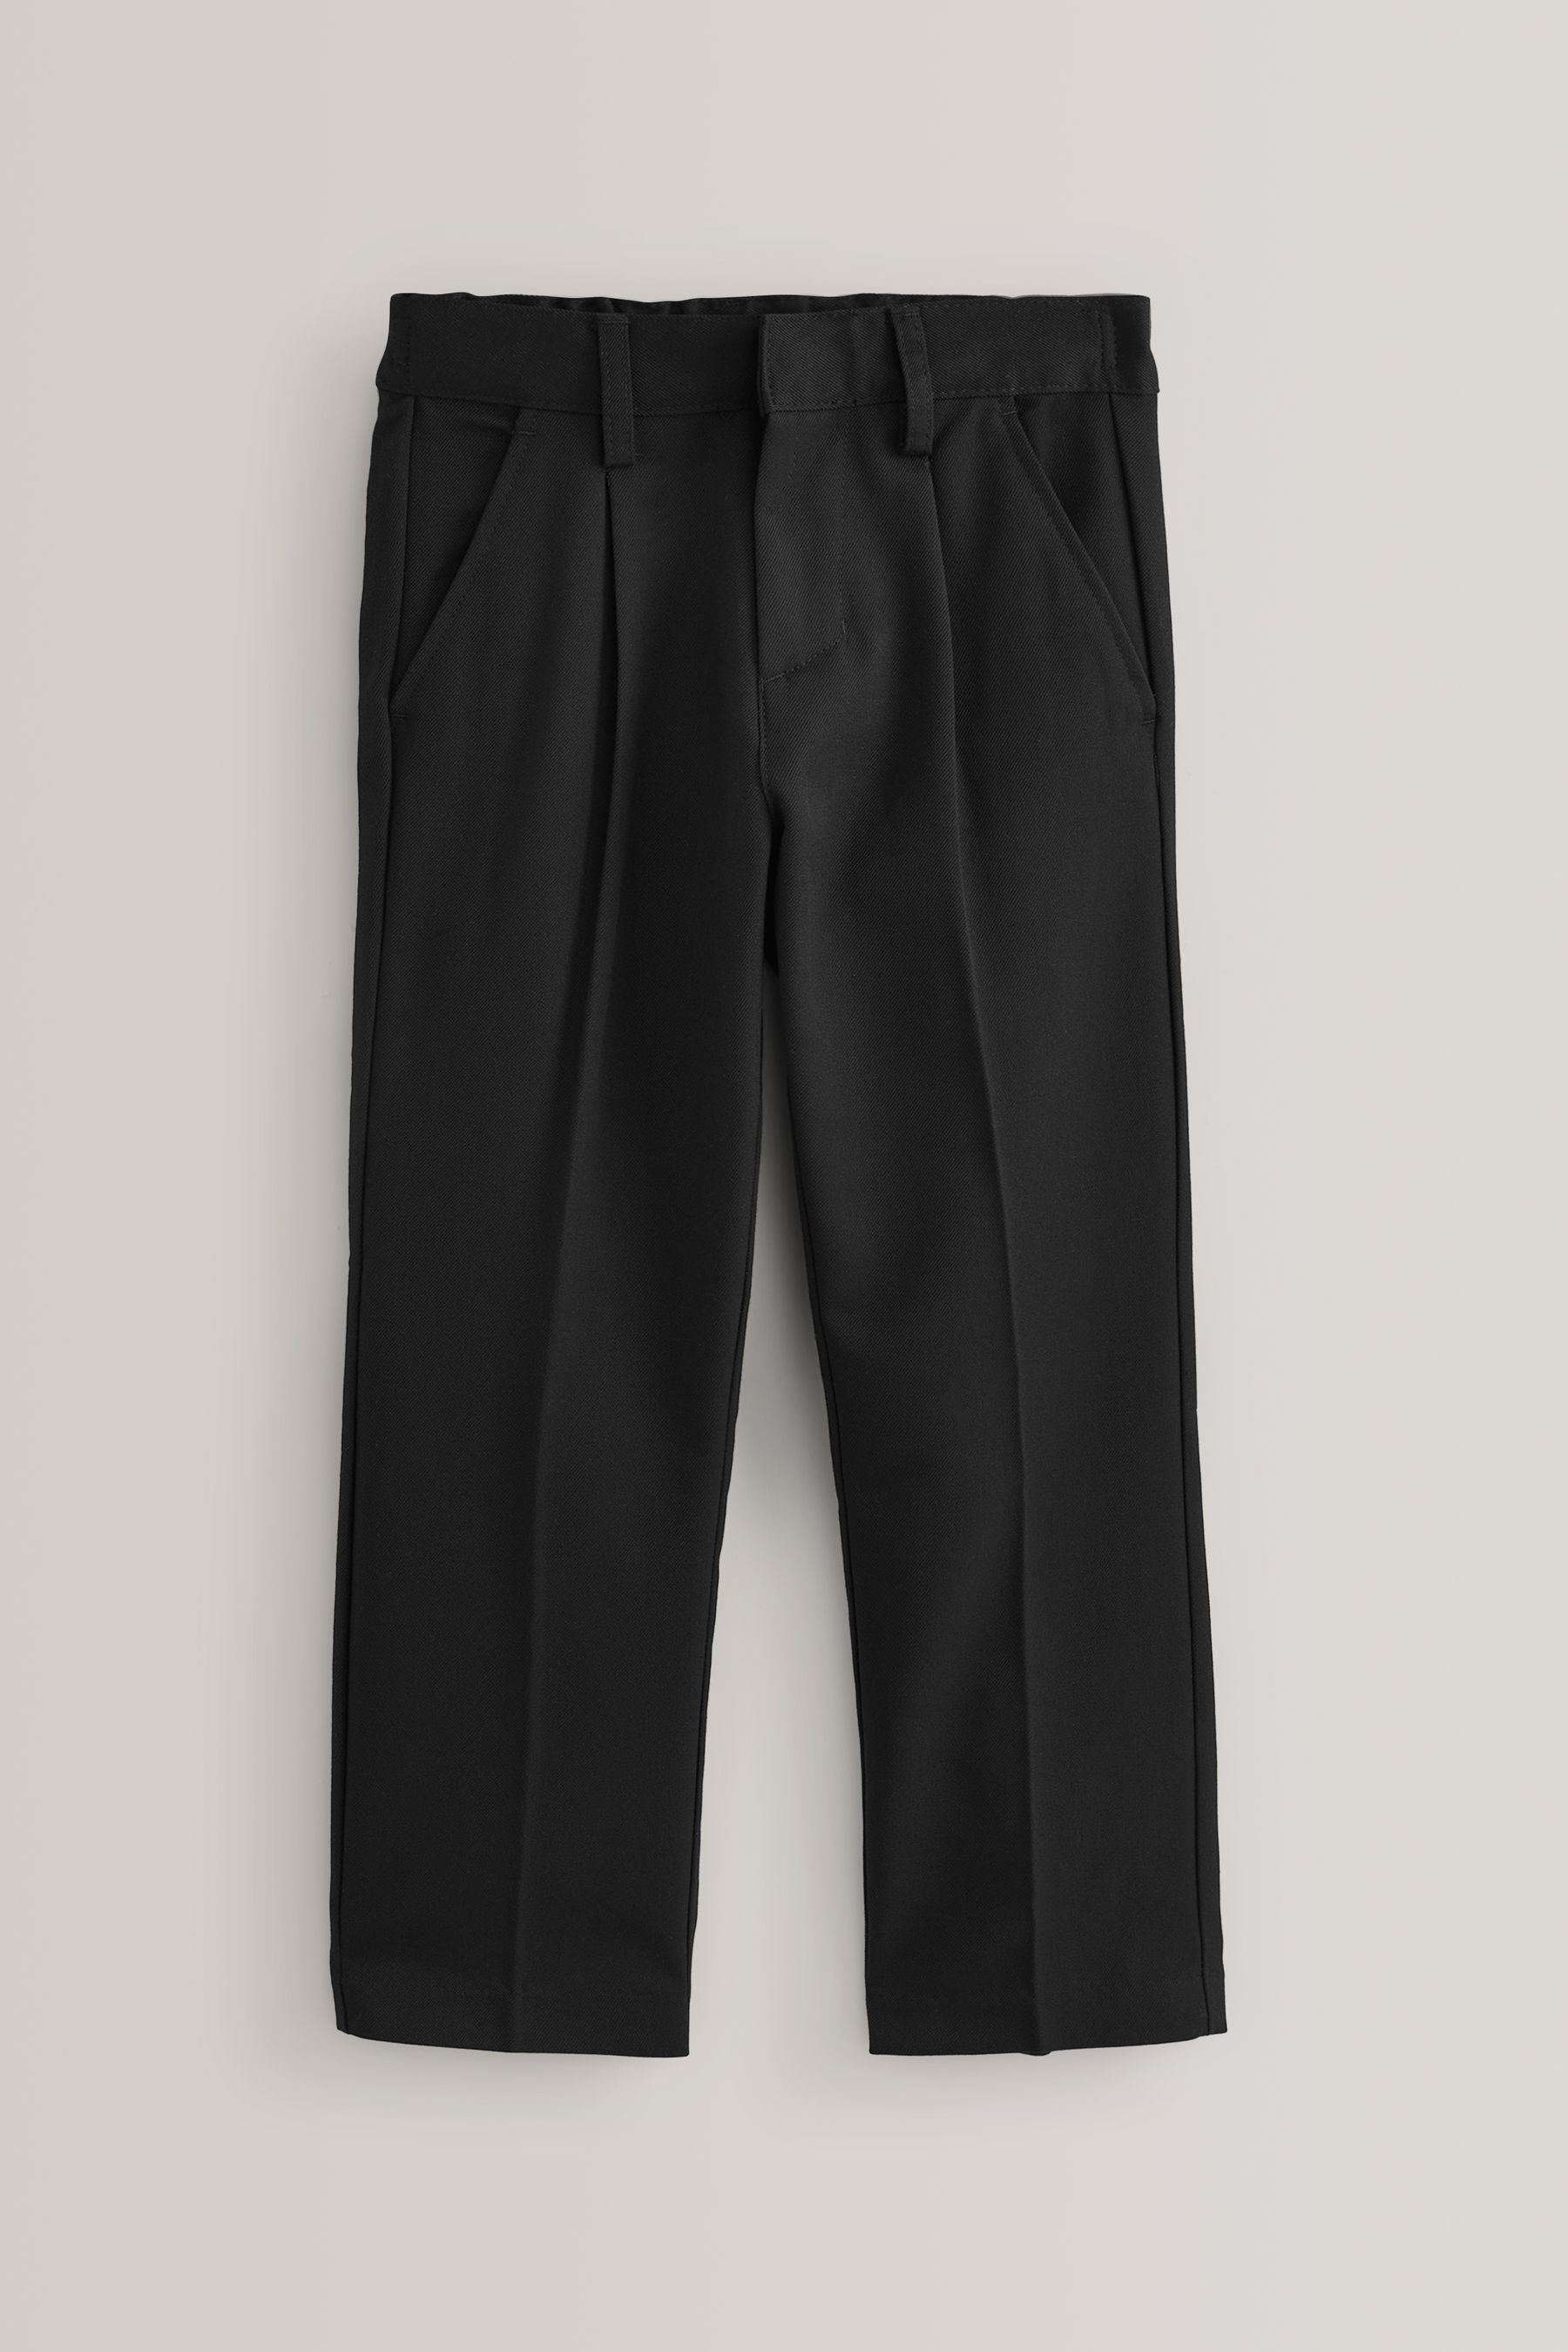 Buy Black Slim Waist School Pleat Front Trousers (3-17yrs) from the ...